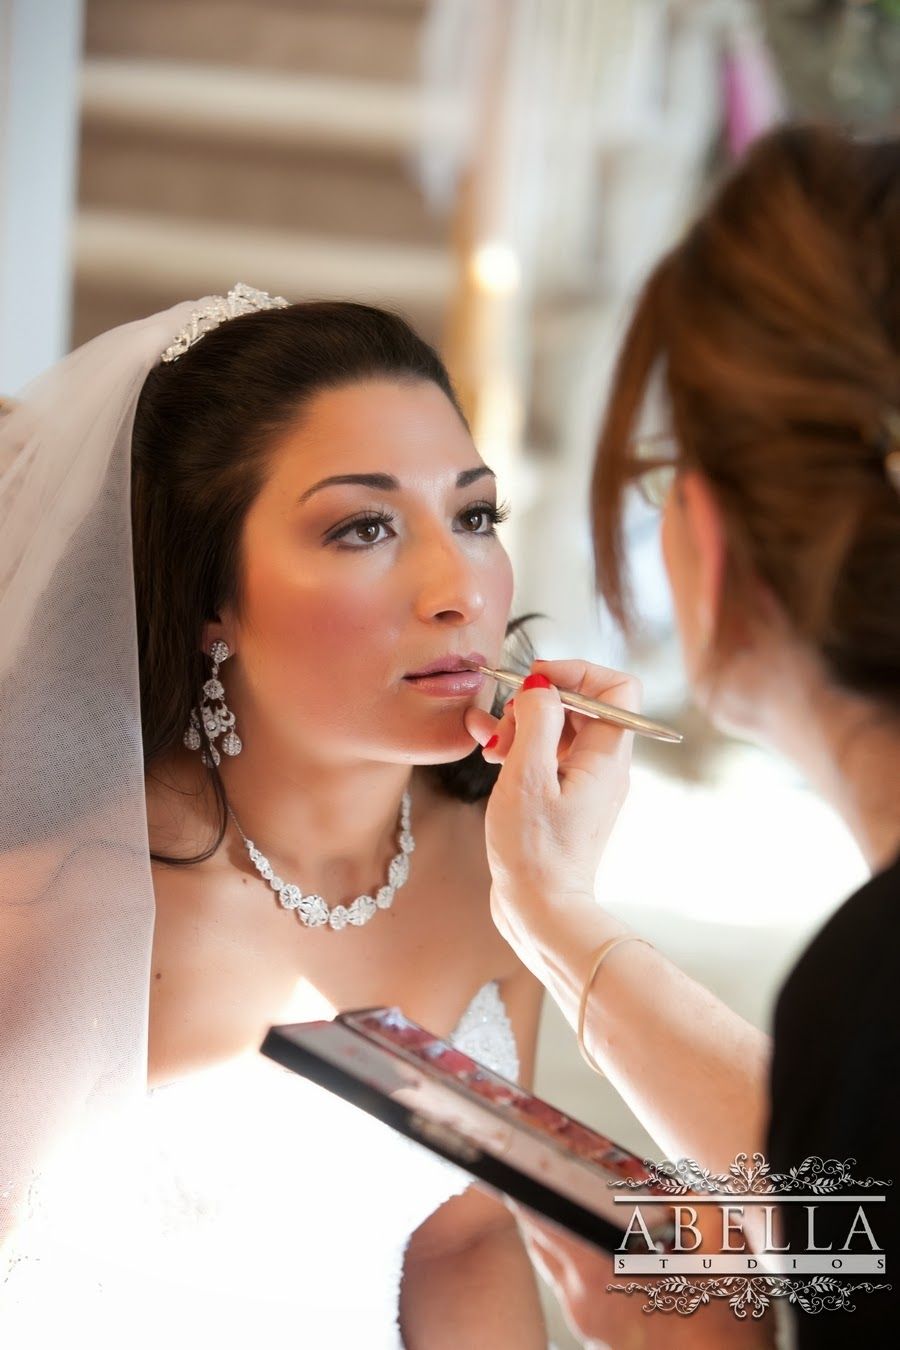 WHY DOES BRIDAL MAKEUP COST SO MUCH?